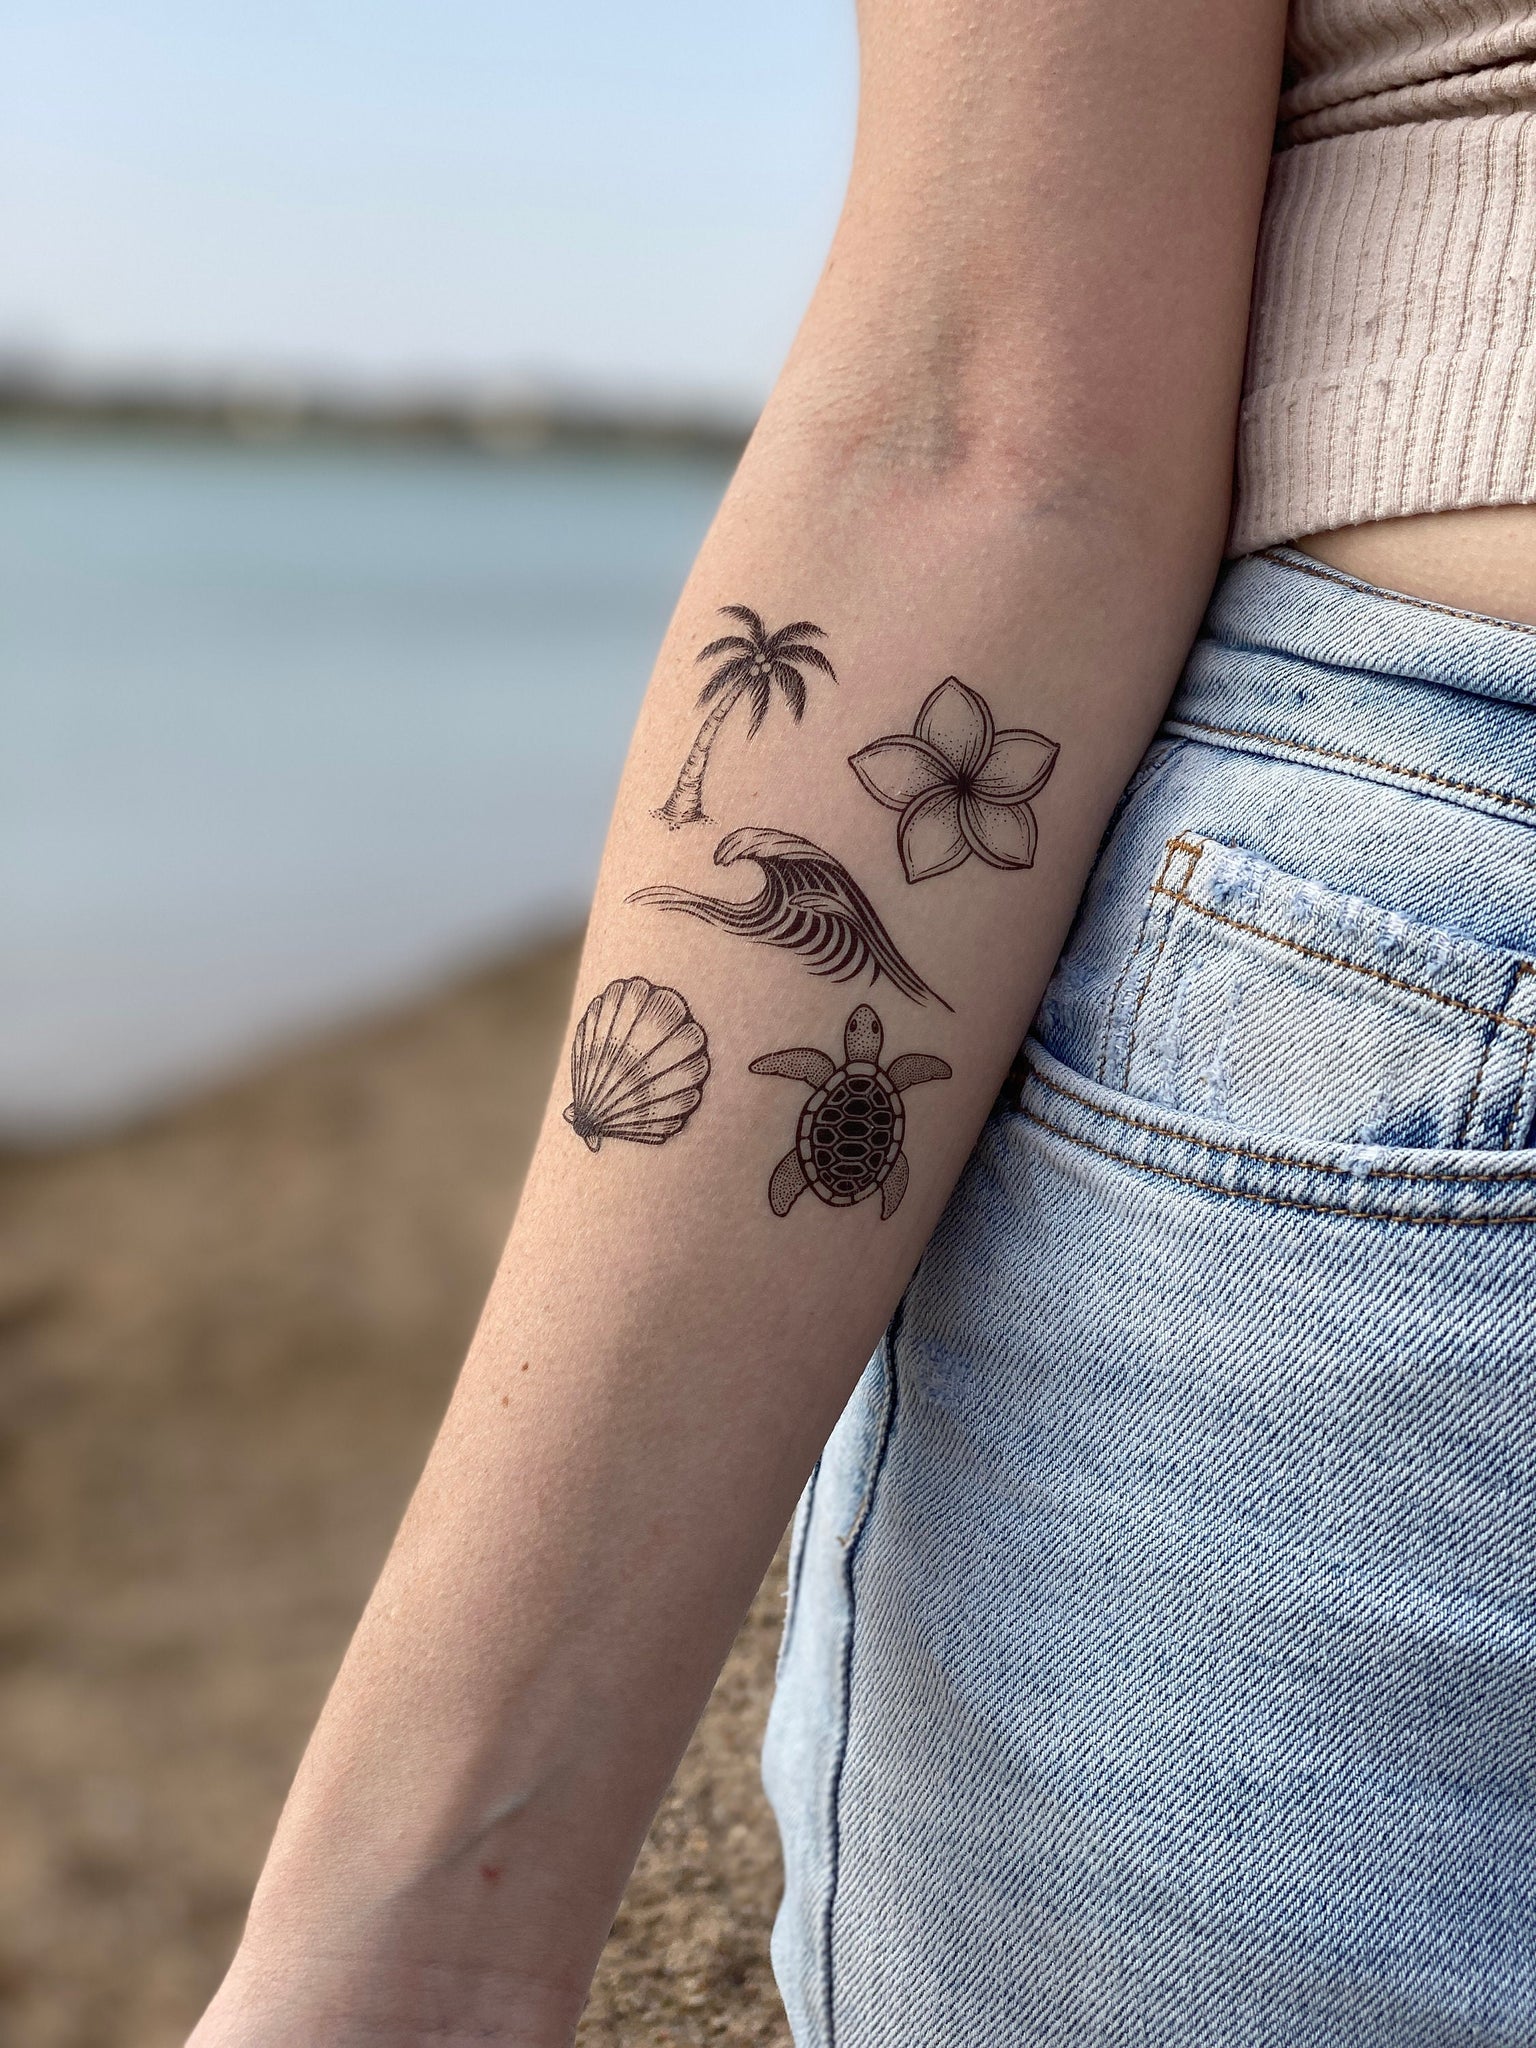 Nature Tattoos: Temporary Little Tattoos to Update Your Look